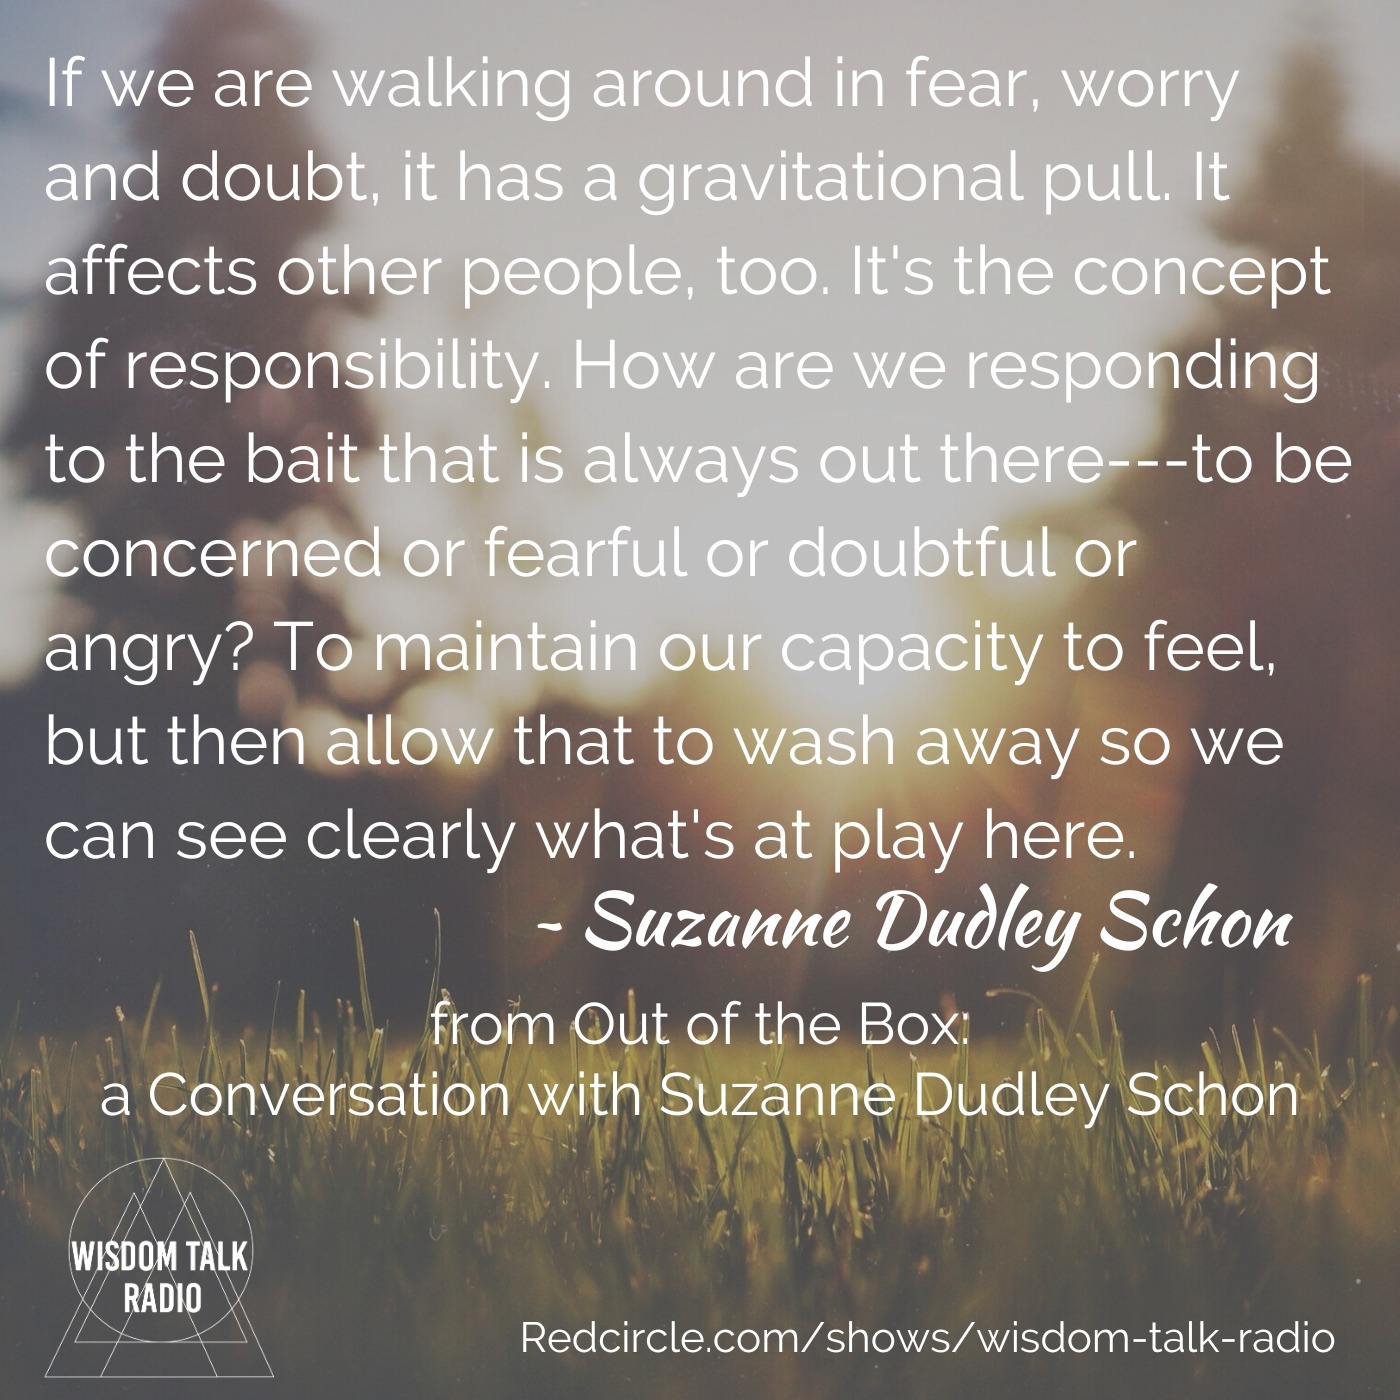 Out of the Box: a Conversation with Suzanne Dudley Schon